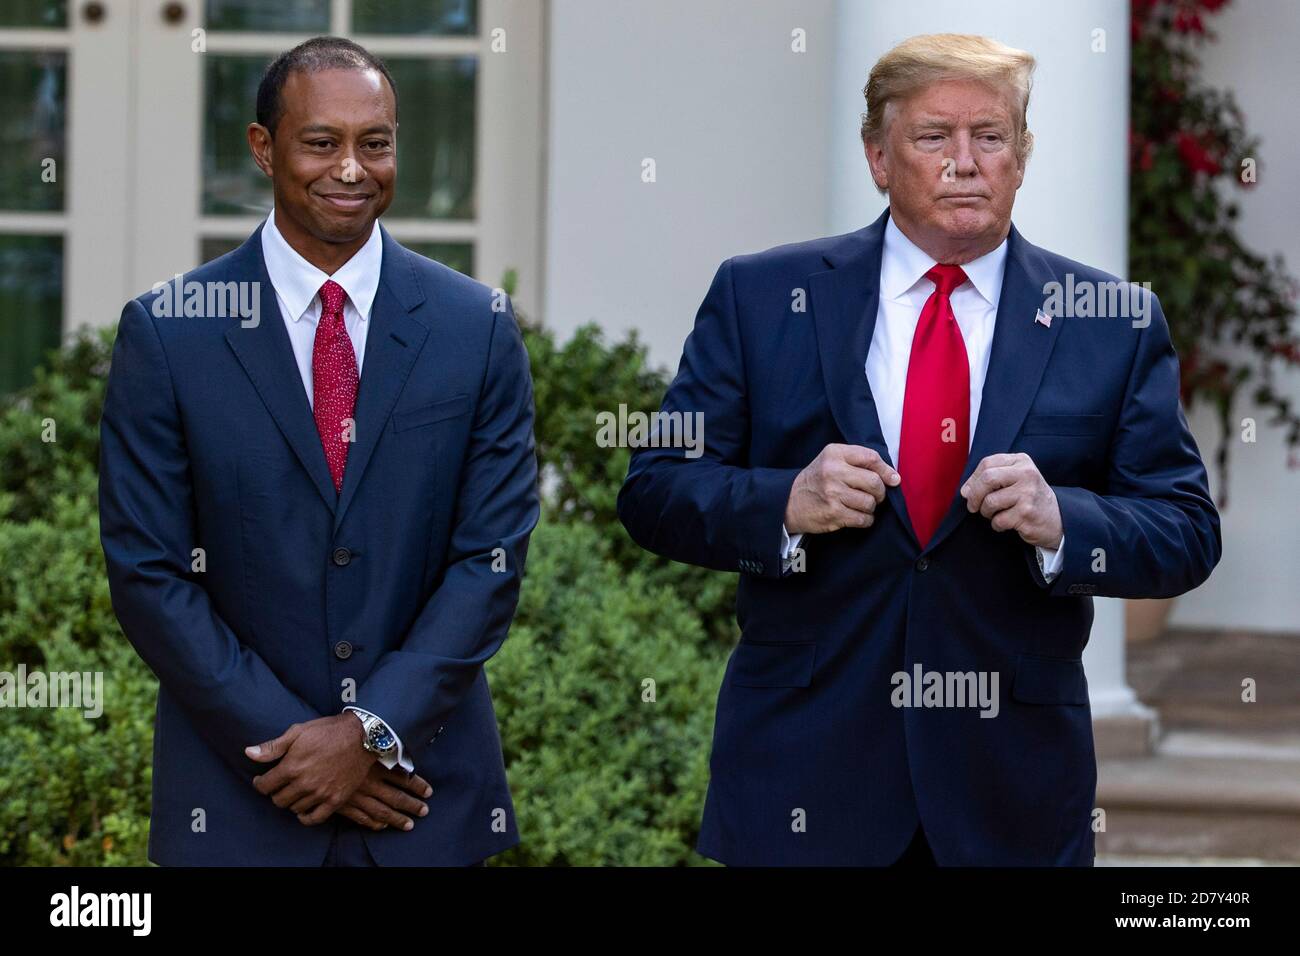 U.S. President Donald Trump adjusts his suit coat as he prepares to award golfer Tiger Woods with the Presidential Medal of Freedom to Woods in the Rose Garden of the White House in Washington, D.C. on Monday, May 6, 2019. The Presidential Medal of Freedom is the highest honor a U.S. President can bestow on a civilian. Woods is the fourth golfer to receive the award. Photographer: Credit: Alex Edelman/The Photo Access Stock Photo